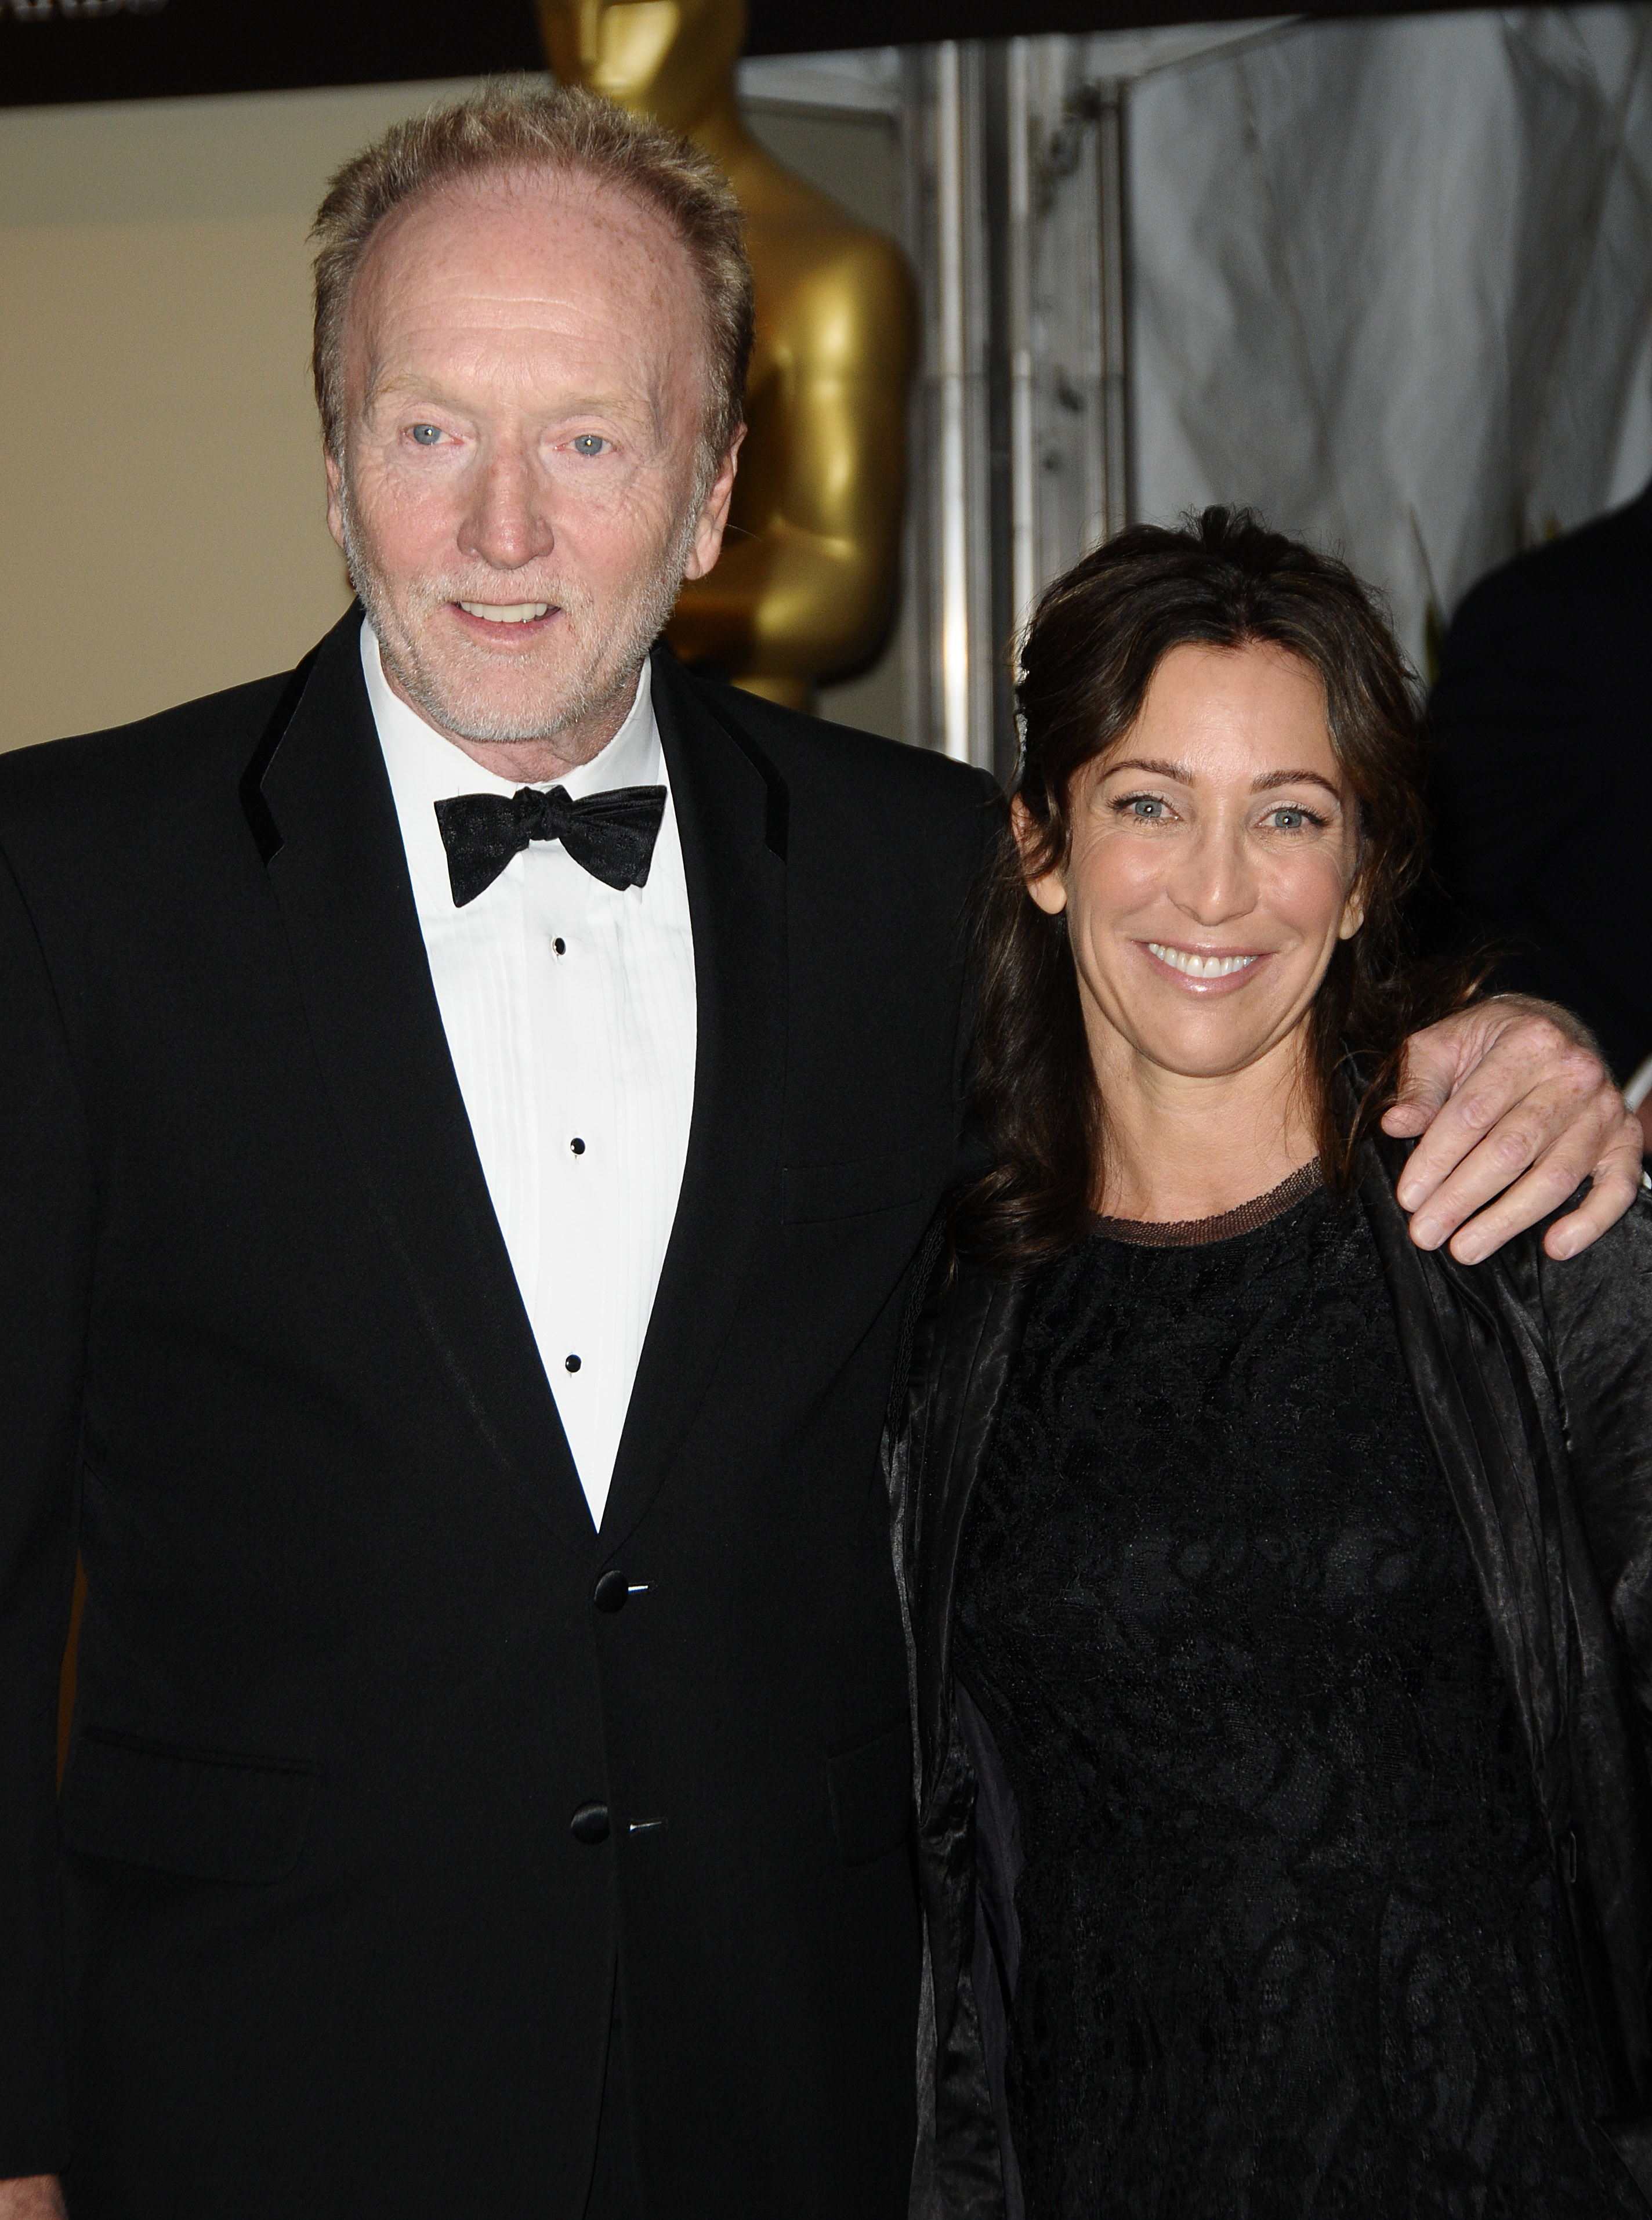 Tobin Bell and Elizabeth Warren at the Academy of Motion Pictures Arts and Sciences' 2nd annual Governors Awards on November 13, 2010, in Hollywood, California. | Source: Getty Images